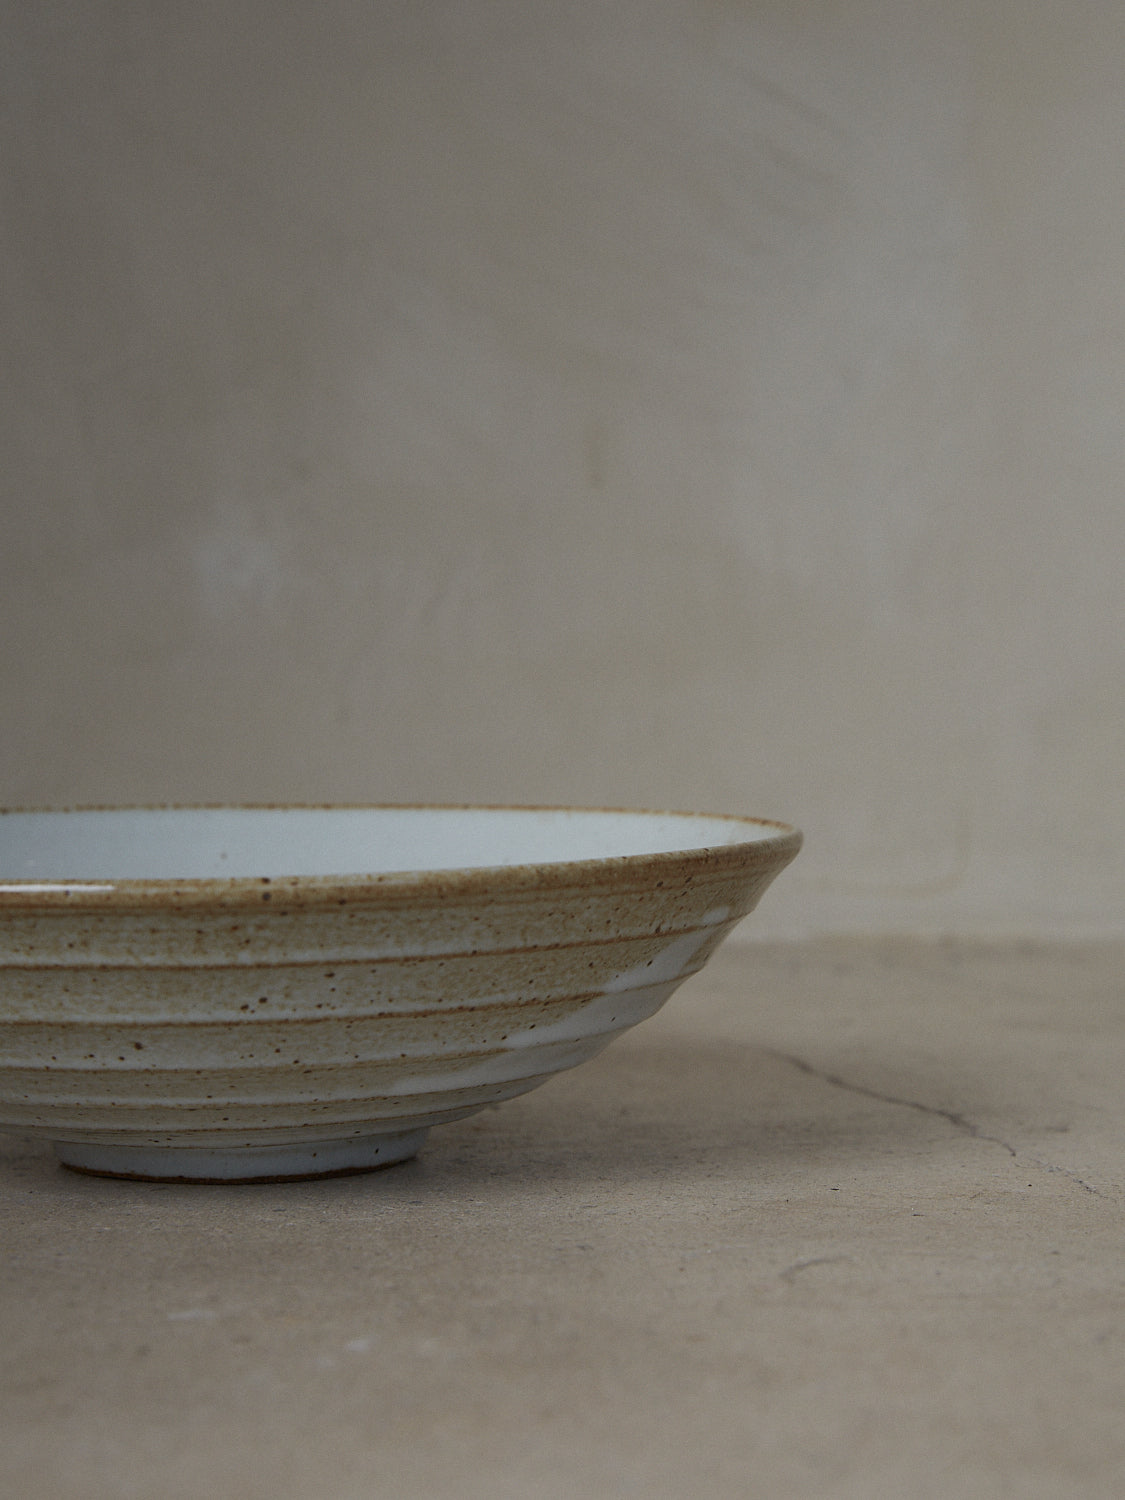 Wide Shinogi Bowl. Limited edition. One-of-a-kind, hand-thrown, footed stoneware bowl with horizontal Japanese Shinogi style ridge pattern on exterior in a creamy white speckle finish. 